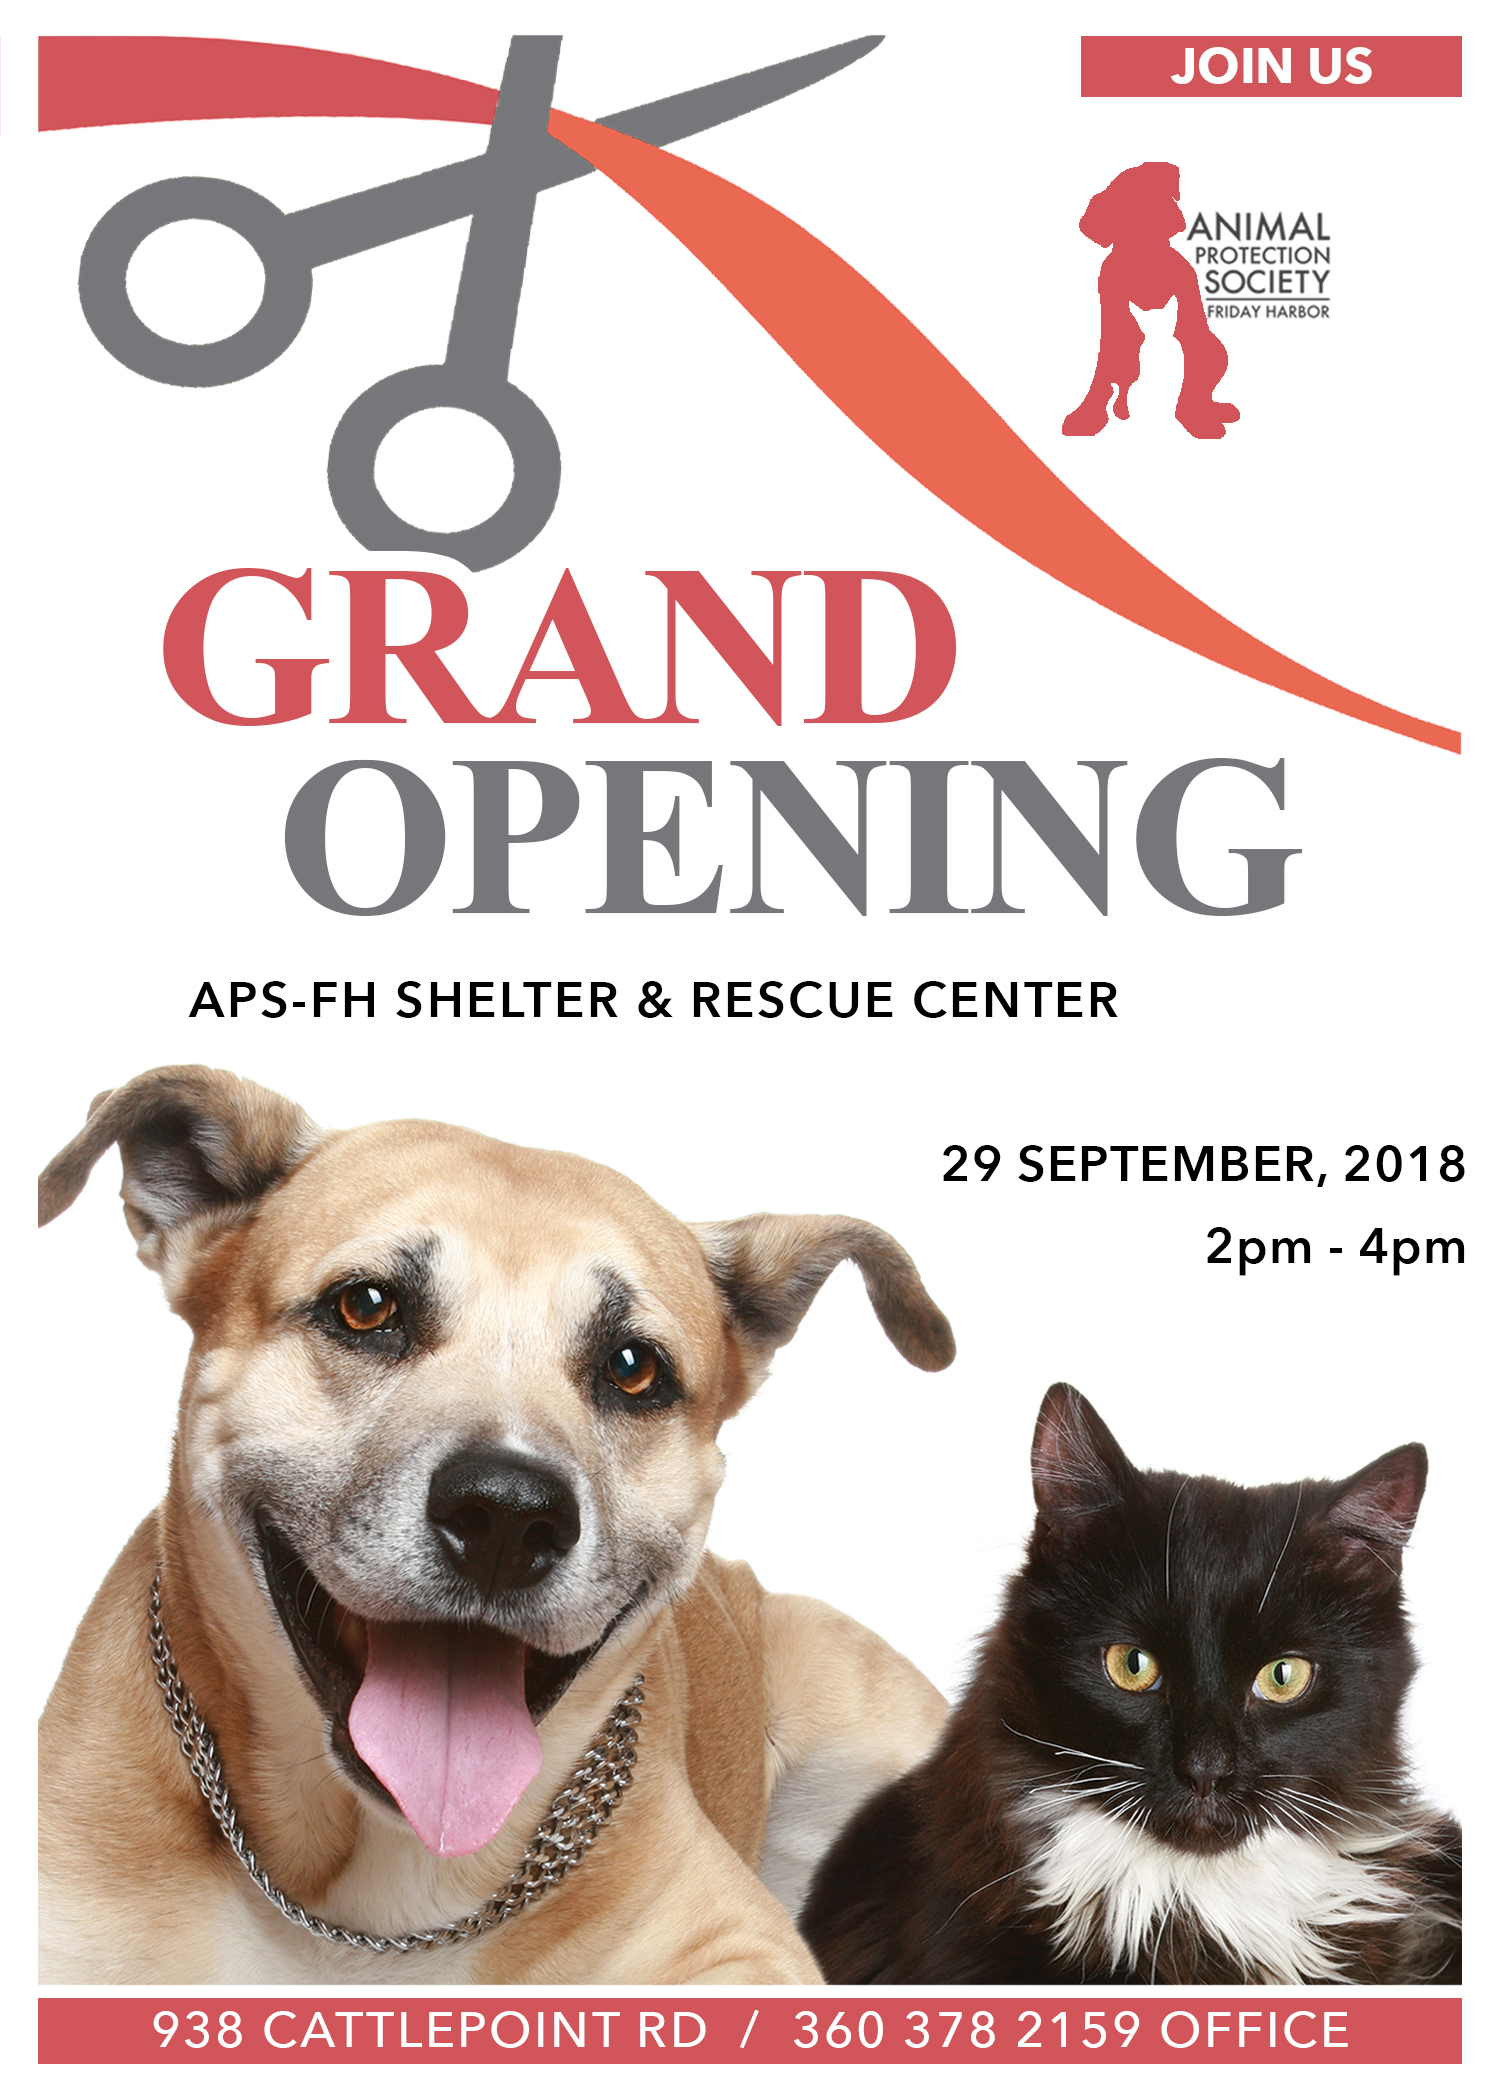 New Shelter, Grand Opening